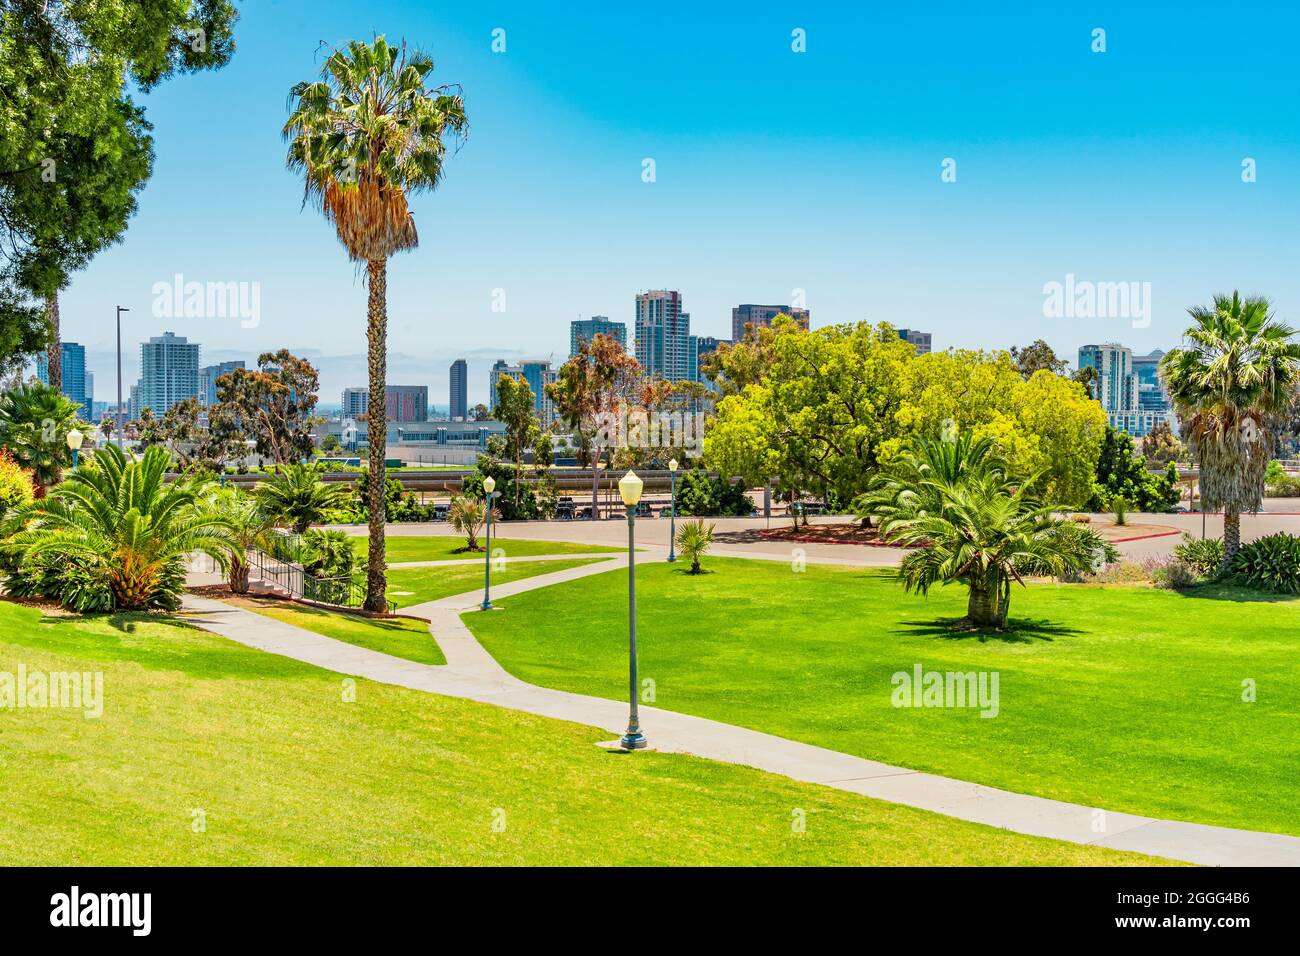 Grassy slopes and lush vegetation of Balboa Park stand in front of the skyline of downtown San Diego. Stock Photo